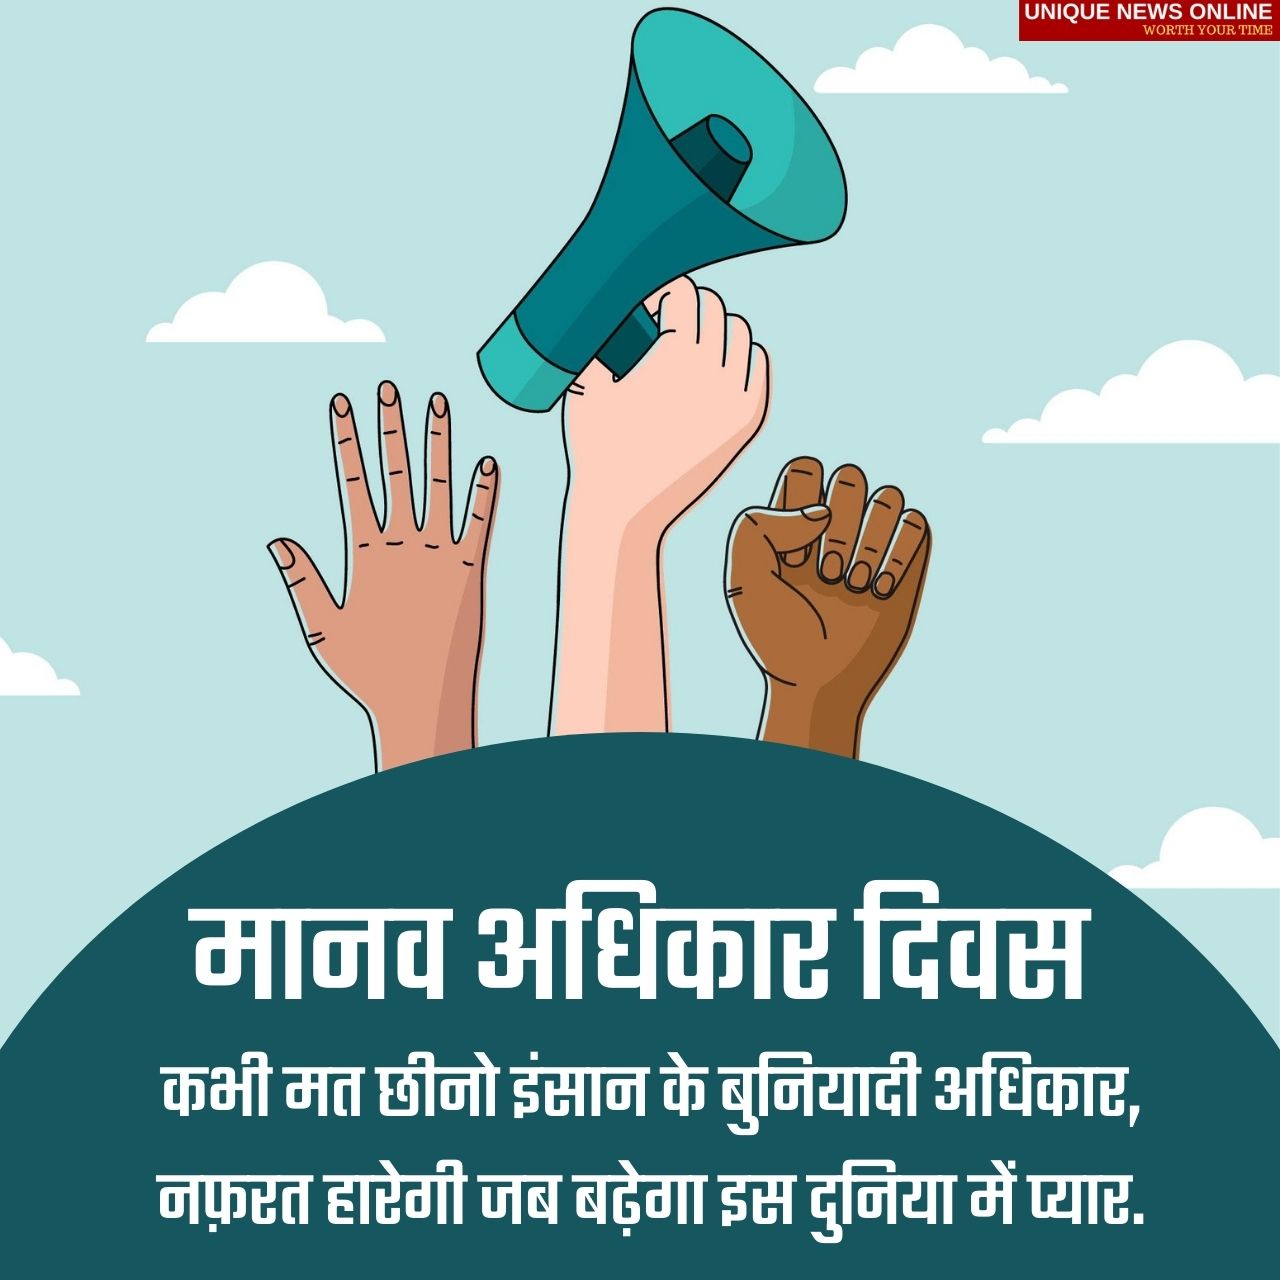 Human Rights Day 2021 Hindi Wishes, Quotes, HD Images, Messages, and Greetings to Share